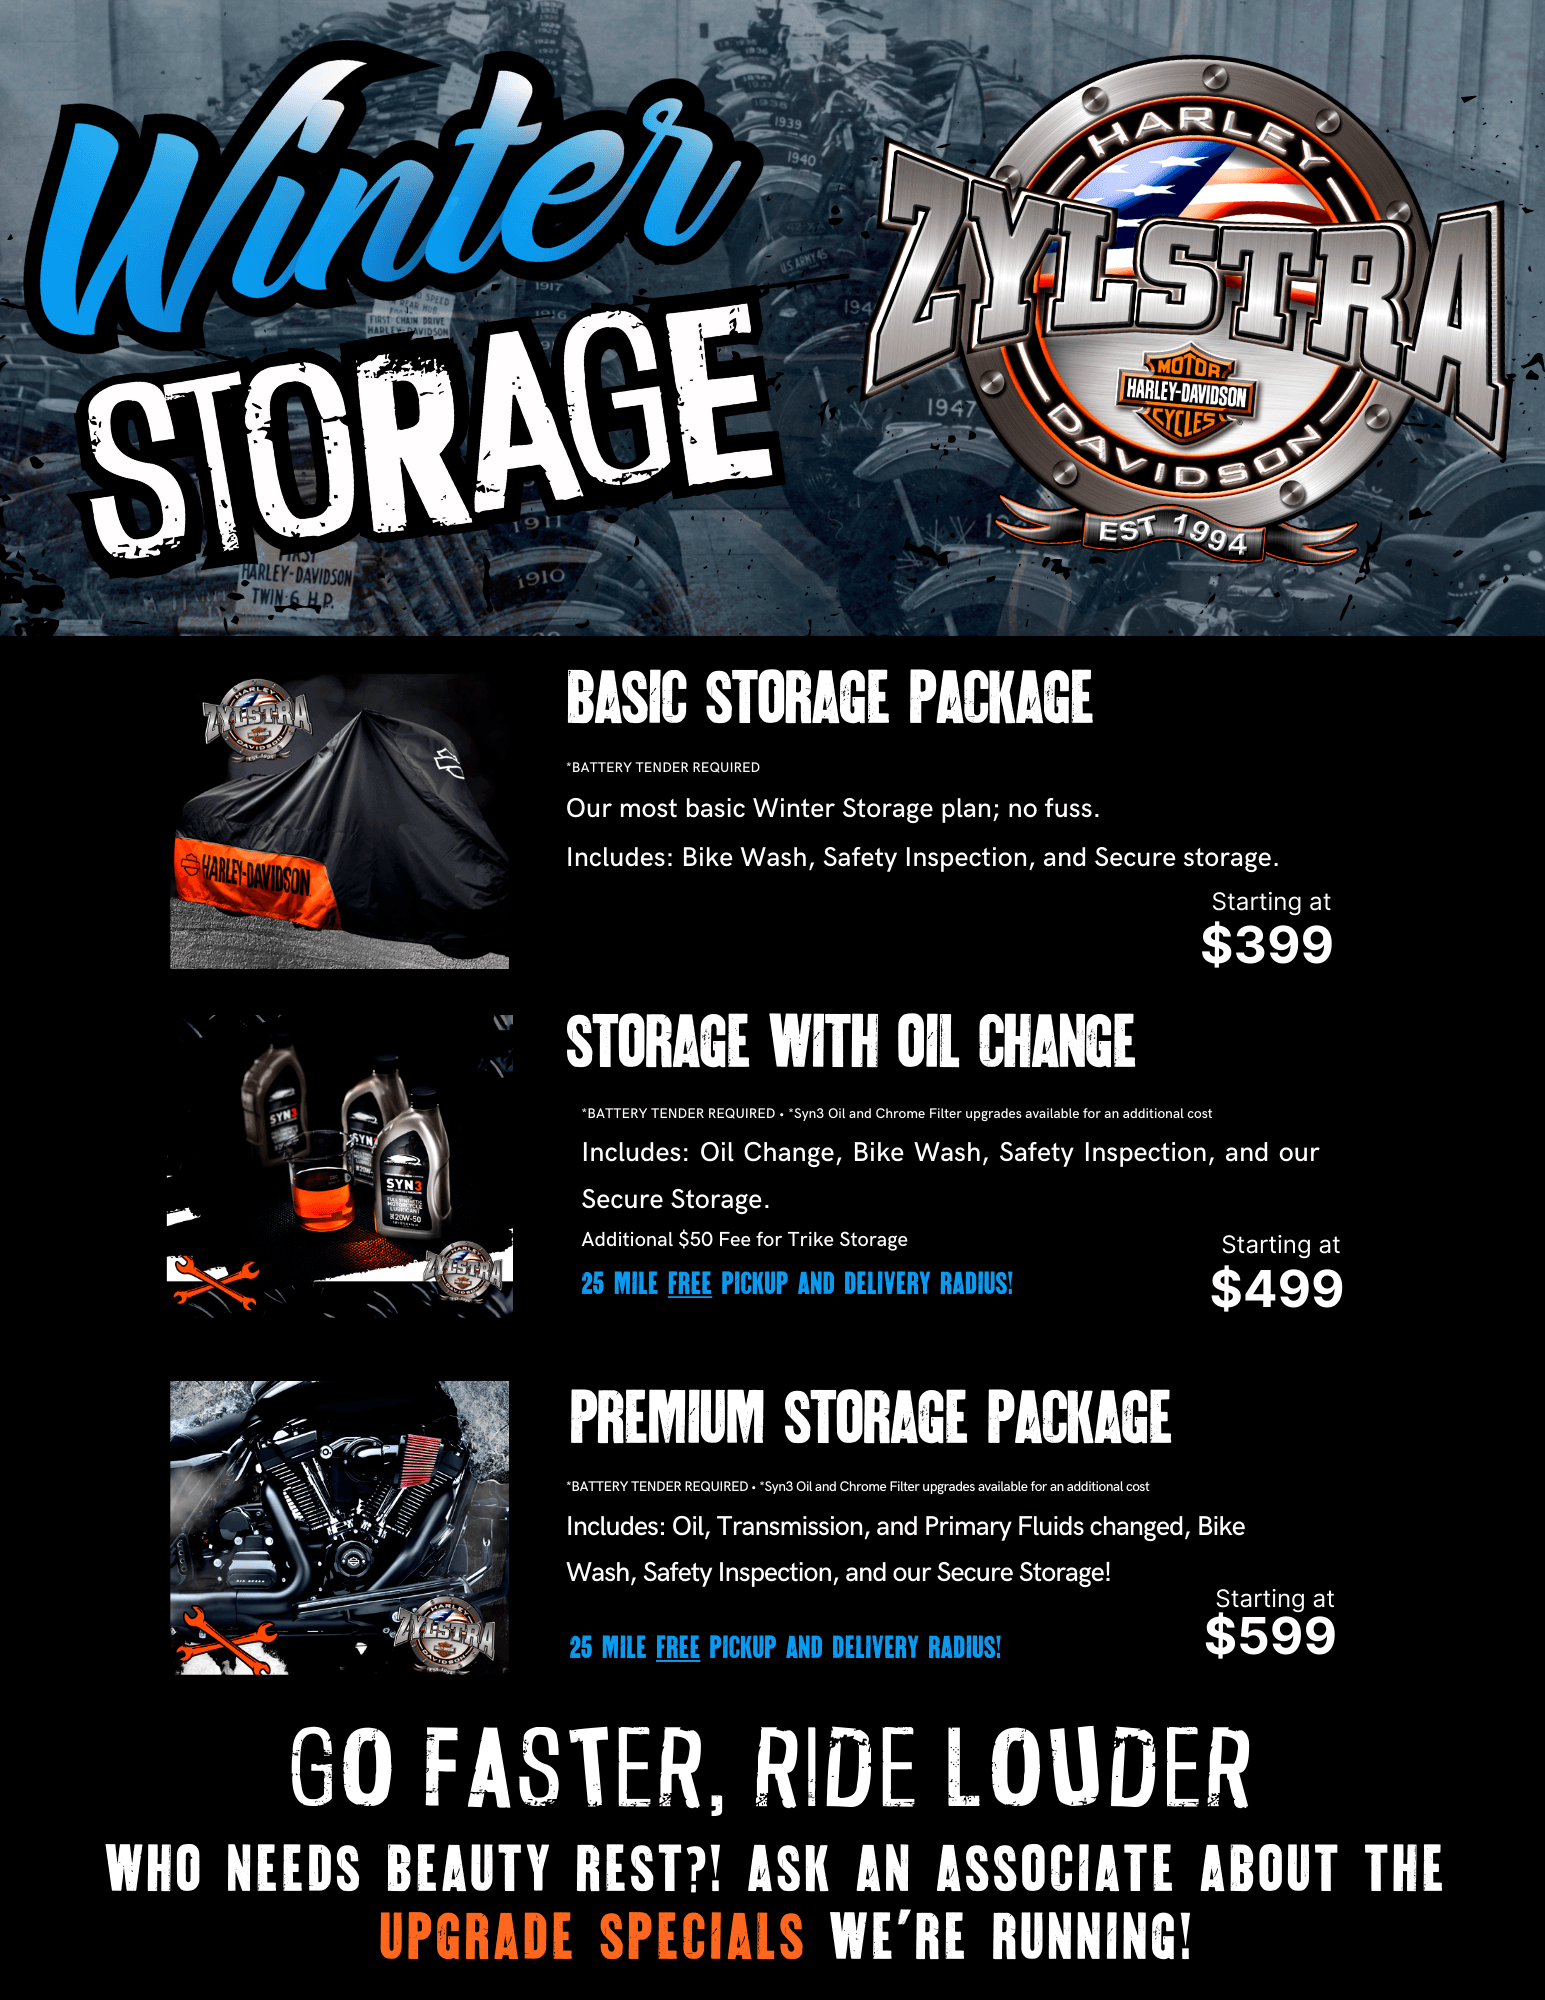 Book your motorcycle winter storage at Zylstra Harley-Davidson in Ames, Iowa with one of three packages. Please call 515-232-6223 for details